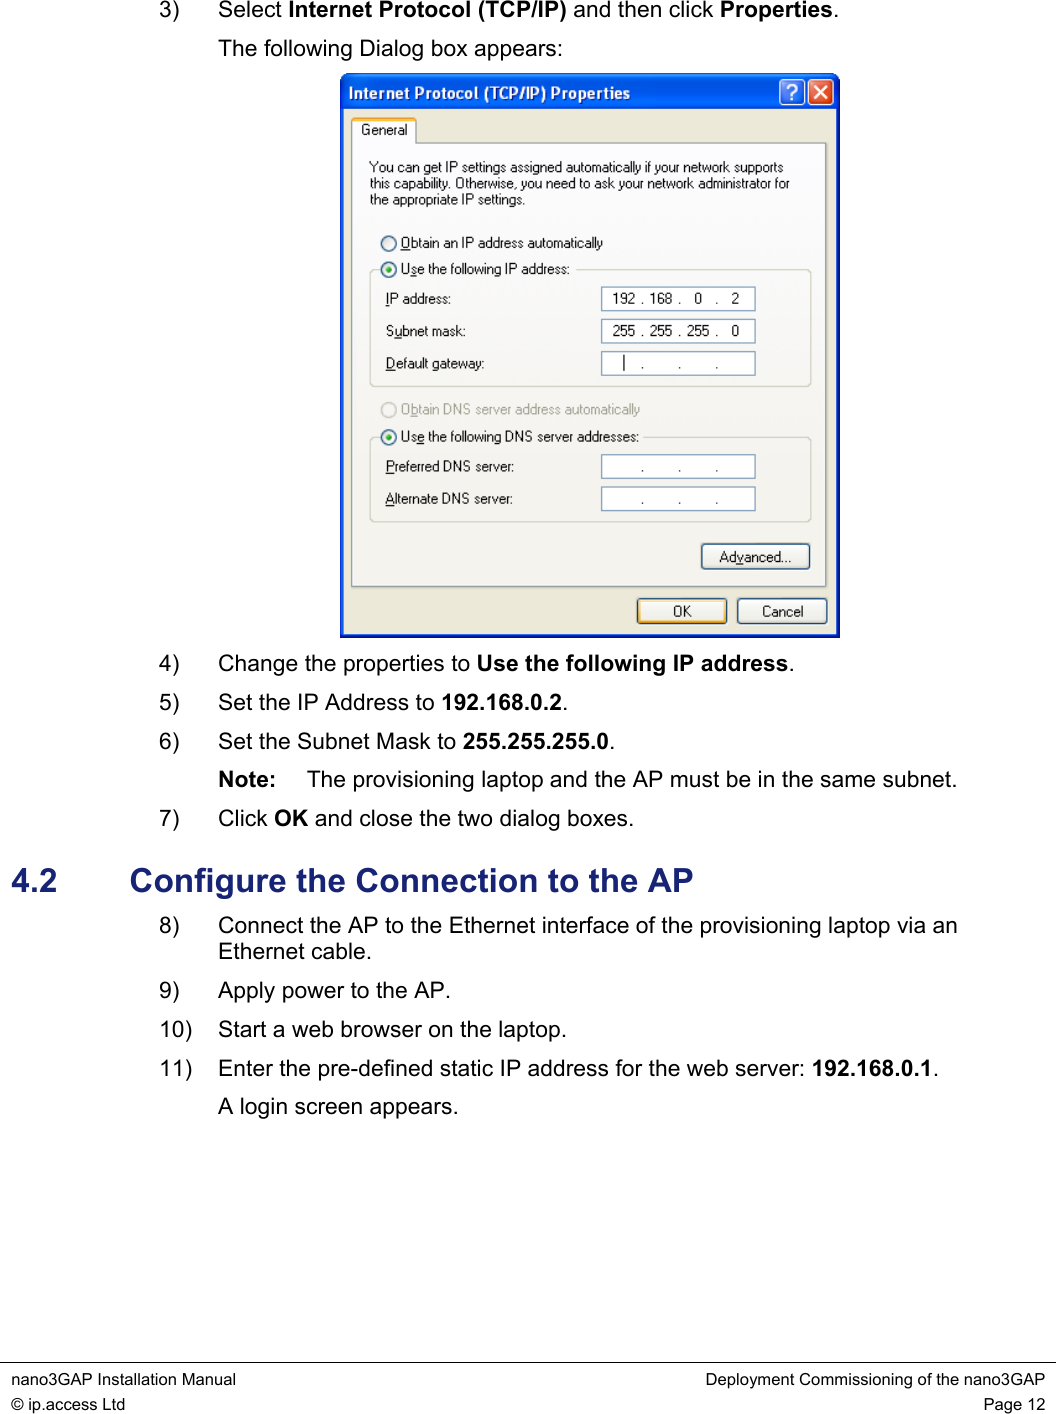  nano3GAP Installation Manual  Deployment Commissioning of the nano3GAP © ip.access Ltd  Page 12  3) Select Internet Protocol (TCP/IP) and then click Properties. The following Dialog box appears:  4)  Change the properties to Use the following IP address. 5)  Set the IP Address to 192.168.0.2. 6)  Set the Subnet Mask to 255.255.255.0. Note:  The provisioning laptop and the AP must be in the same subnet. 7) Click OK and close the two dialog boxes. 4.2  Configure the Connection to the AP 8)  Connect the AP to the Ethernet interface of the provisioning laptop via an Ethernet cable. 9)  Apply power to the AP. 10)  Start a web browser on the laptop. 11)  Enter the pre-defined static IP address for the web server: 192.168.0.1. A login screen appears.      